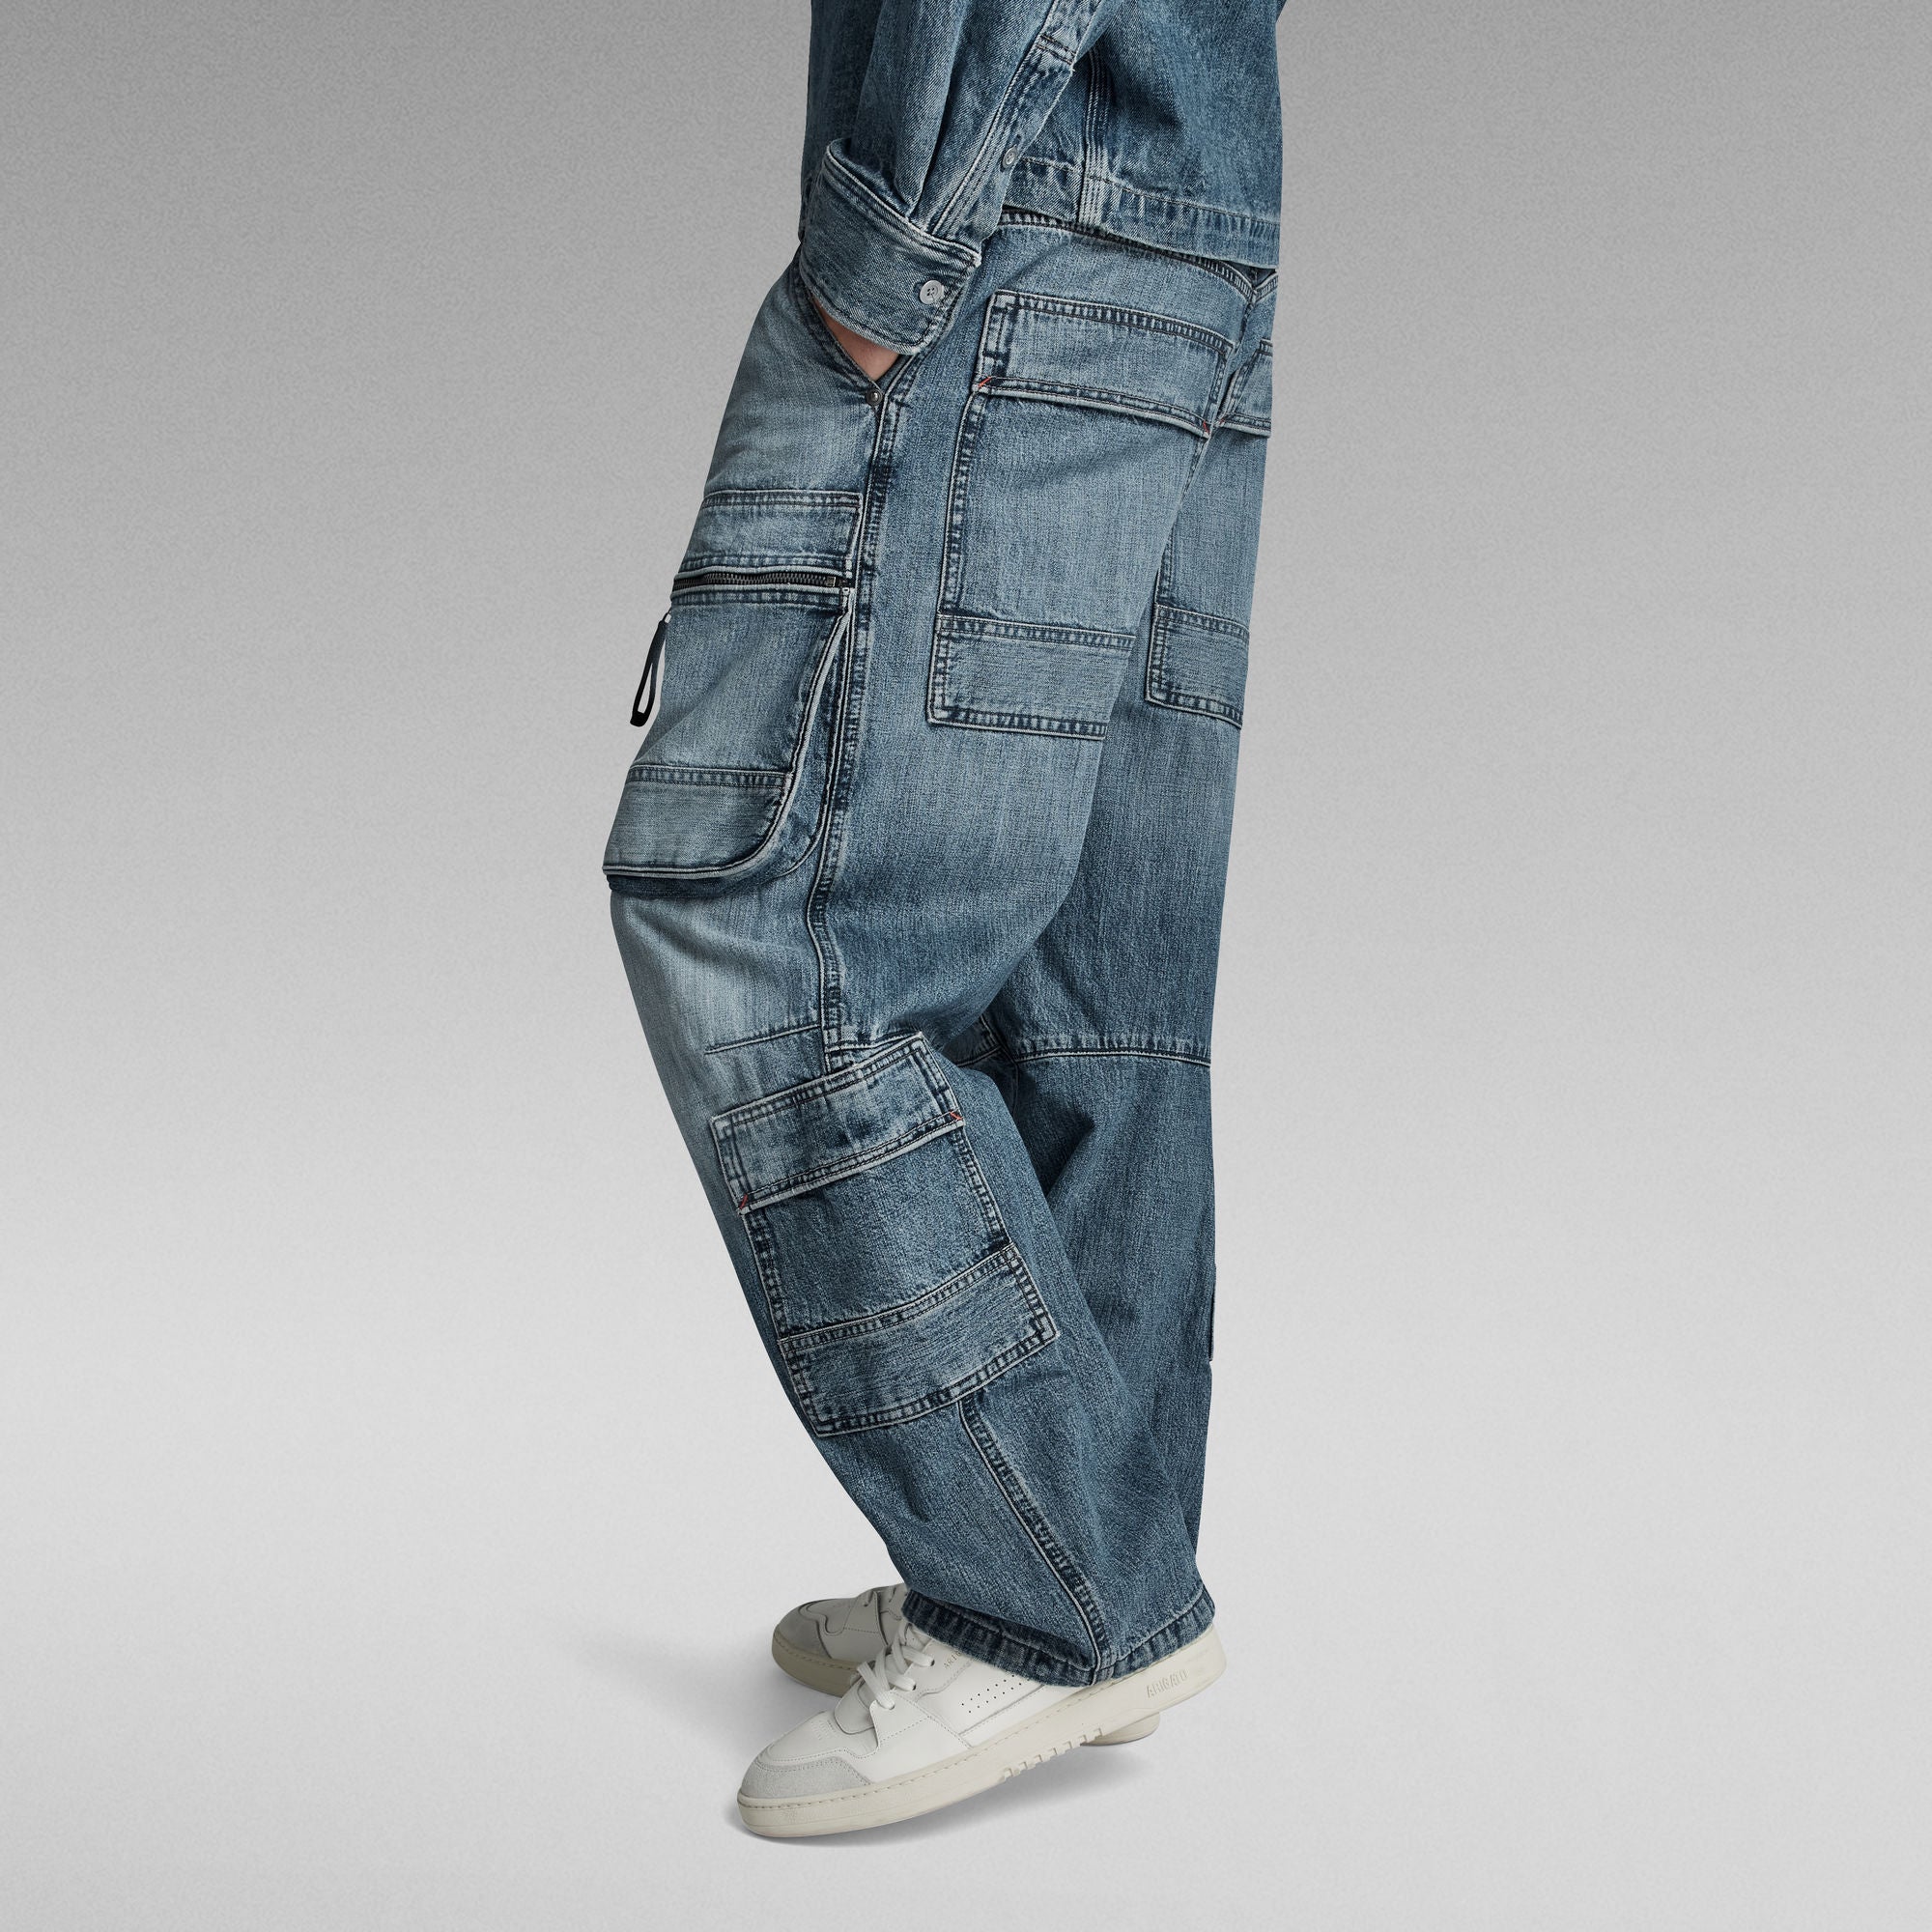 G-Star Raw - Multi Pocket Cargo Relaxed Jean - Faded Denali Blue Destroyed